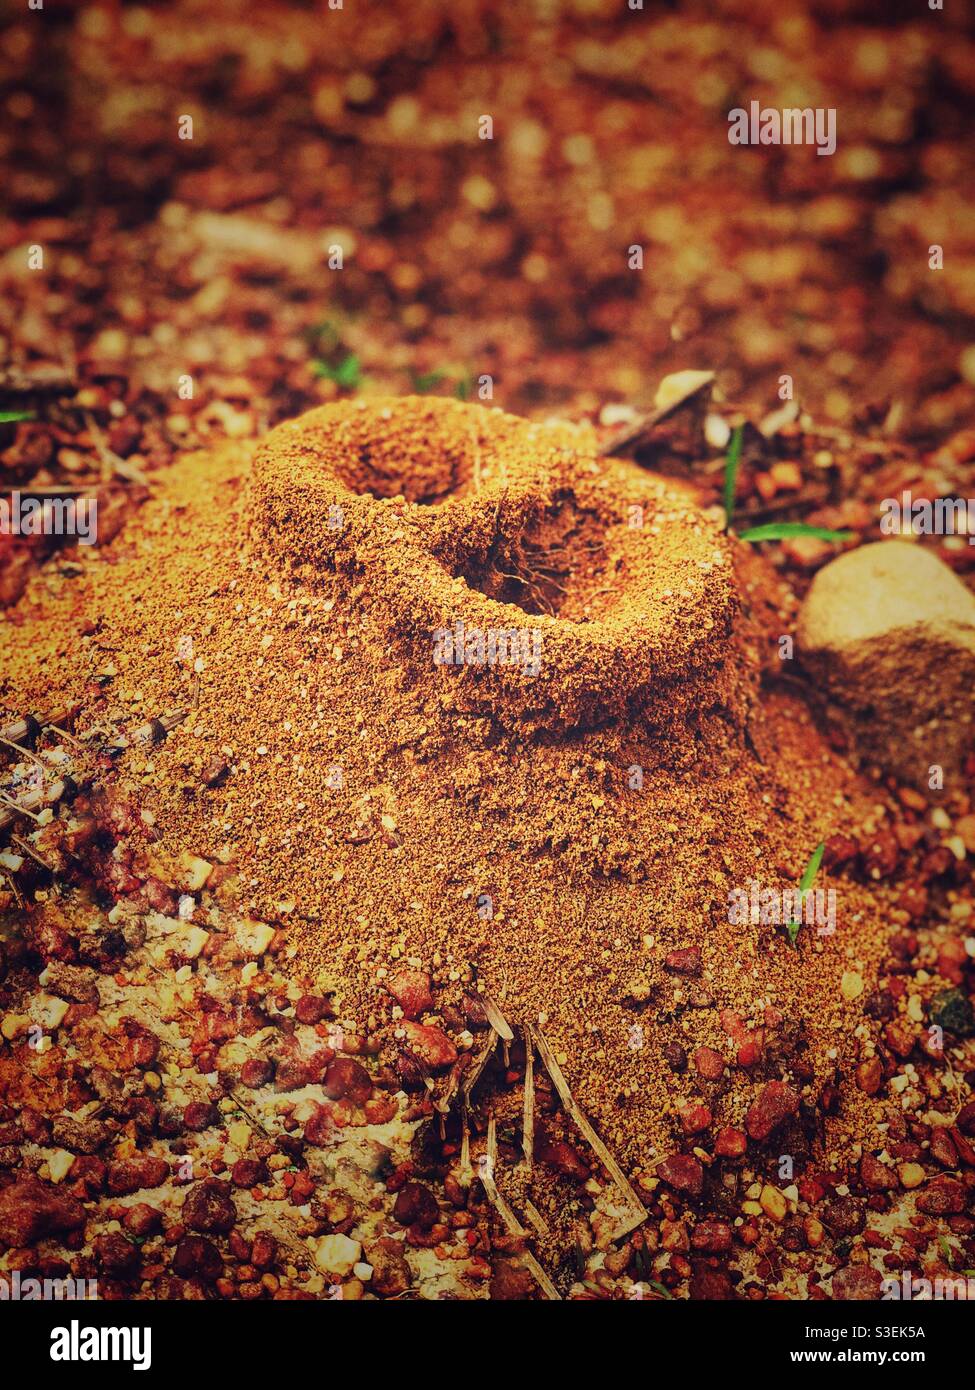 A picture of an ant nest. Stock Photo